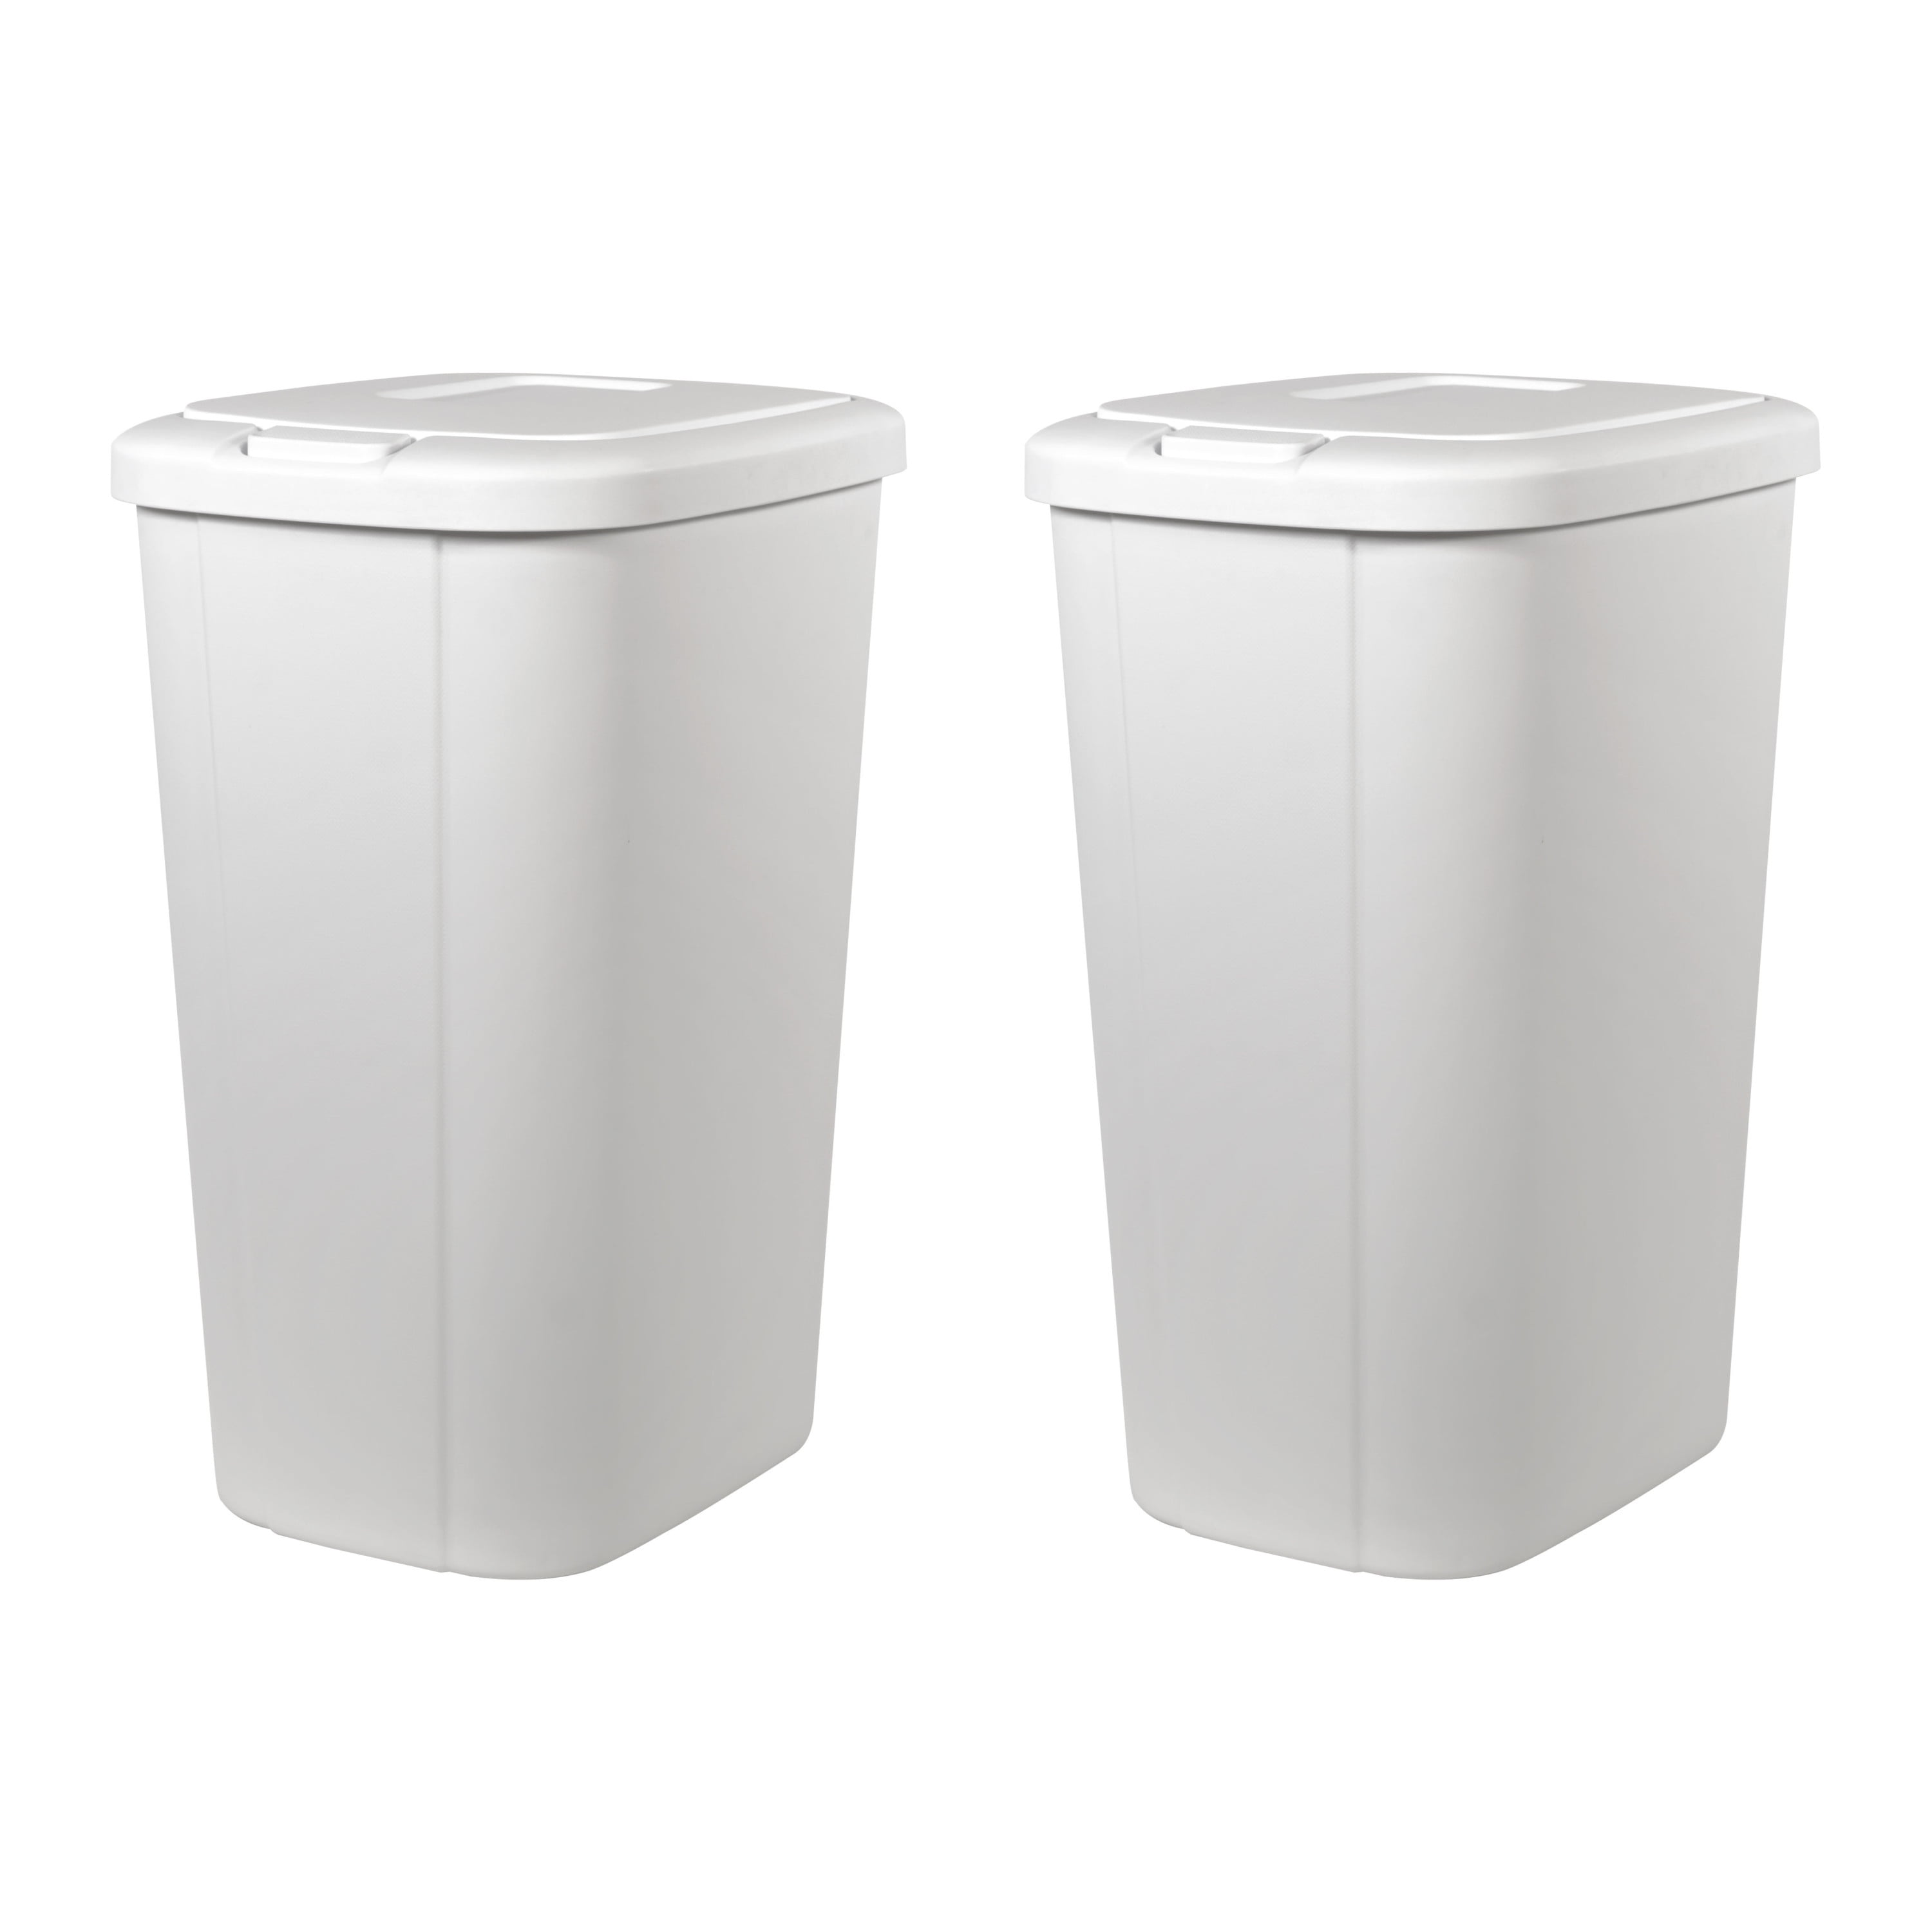 White Plastic Whooty Hoot Wastebasket by Mainstays MS13-006-001-11 